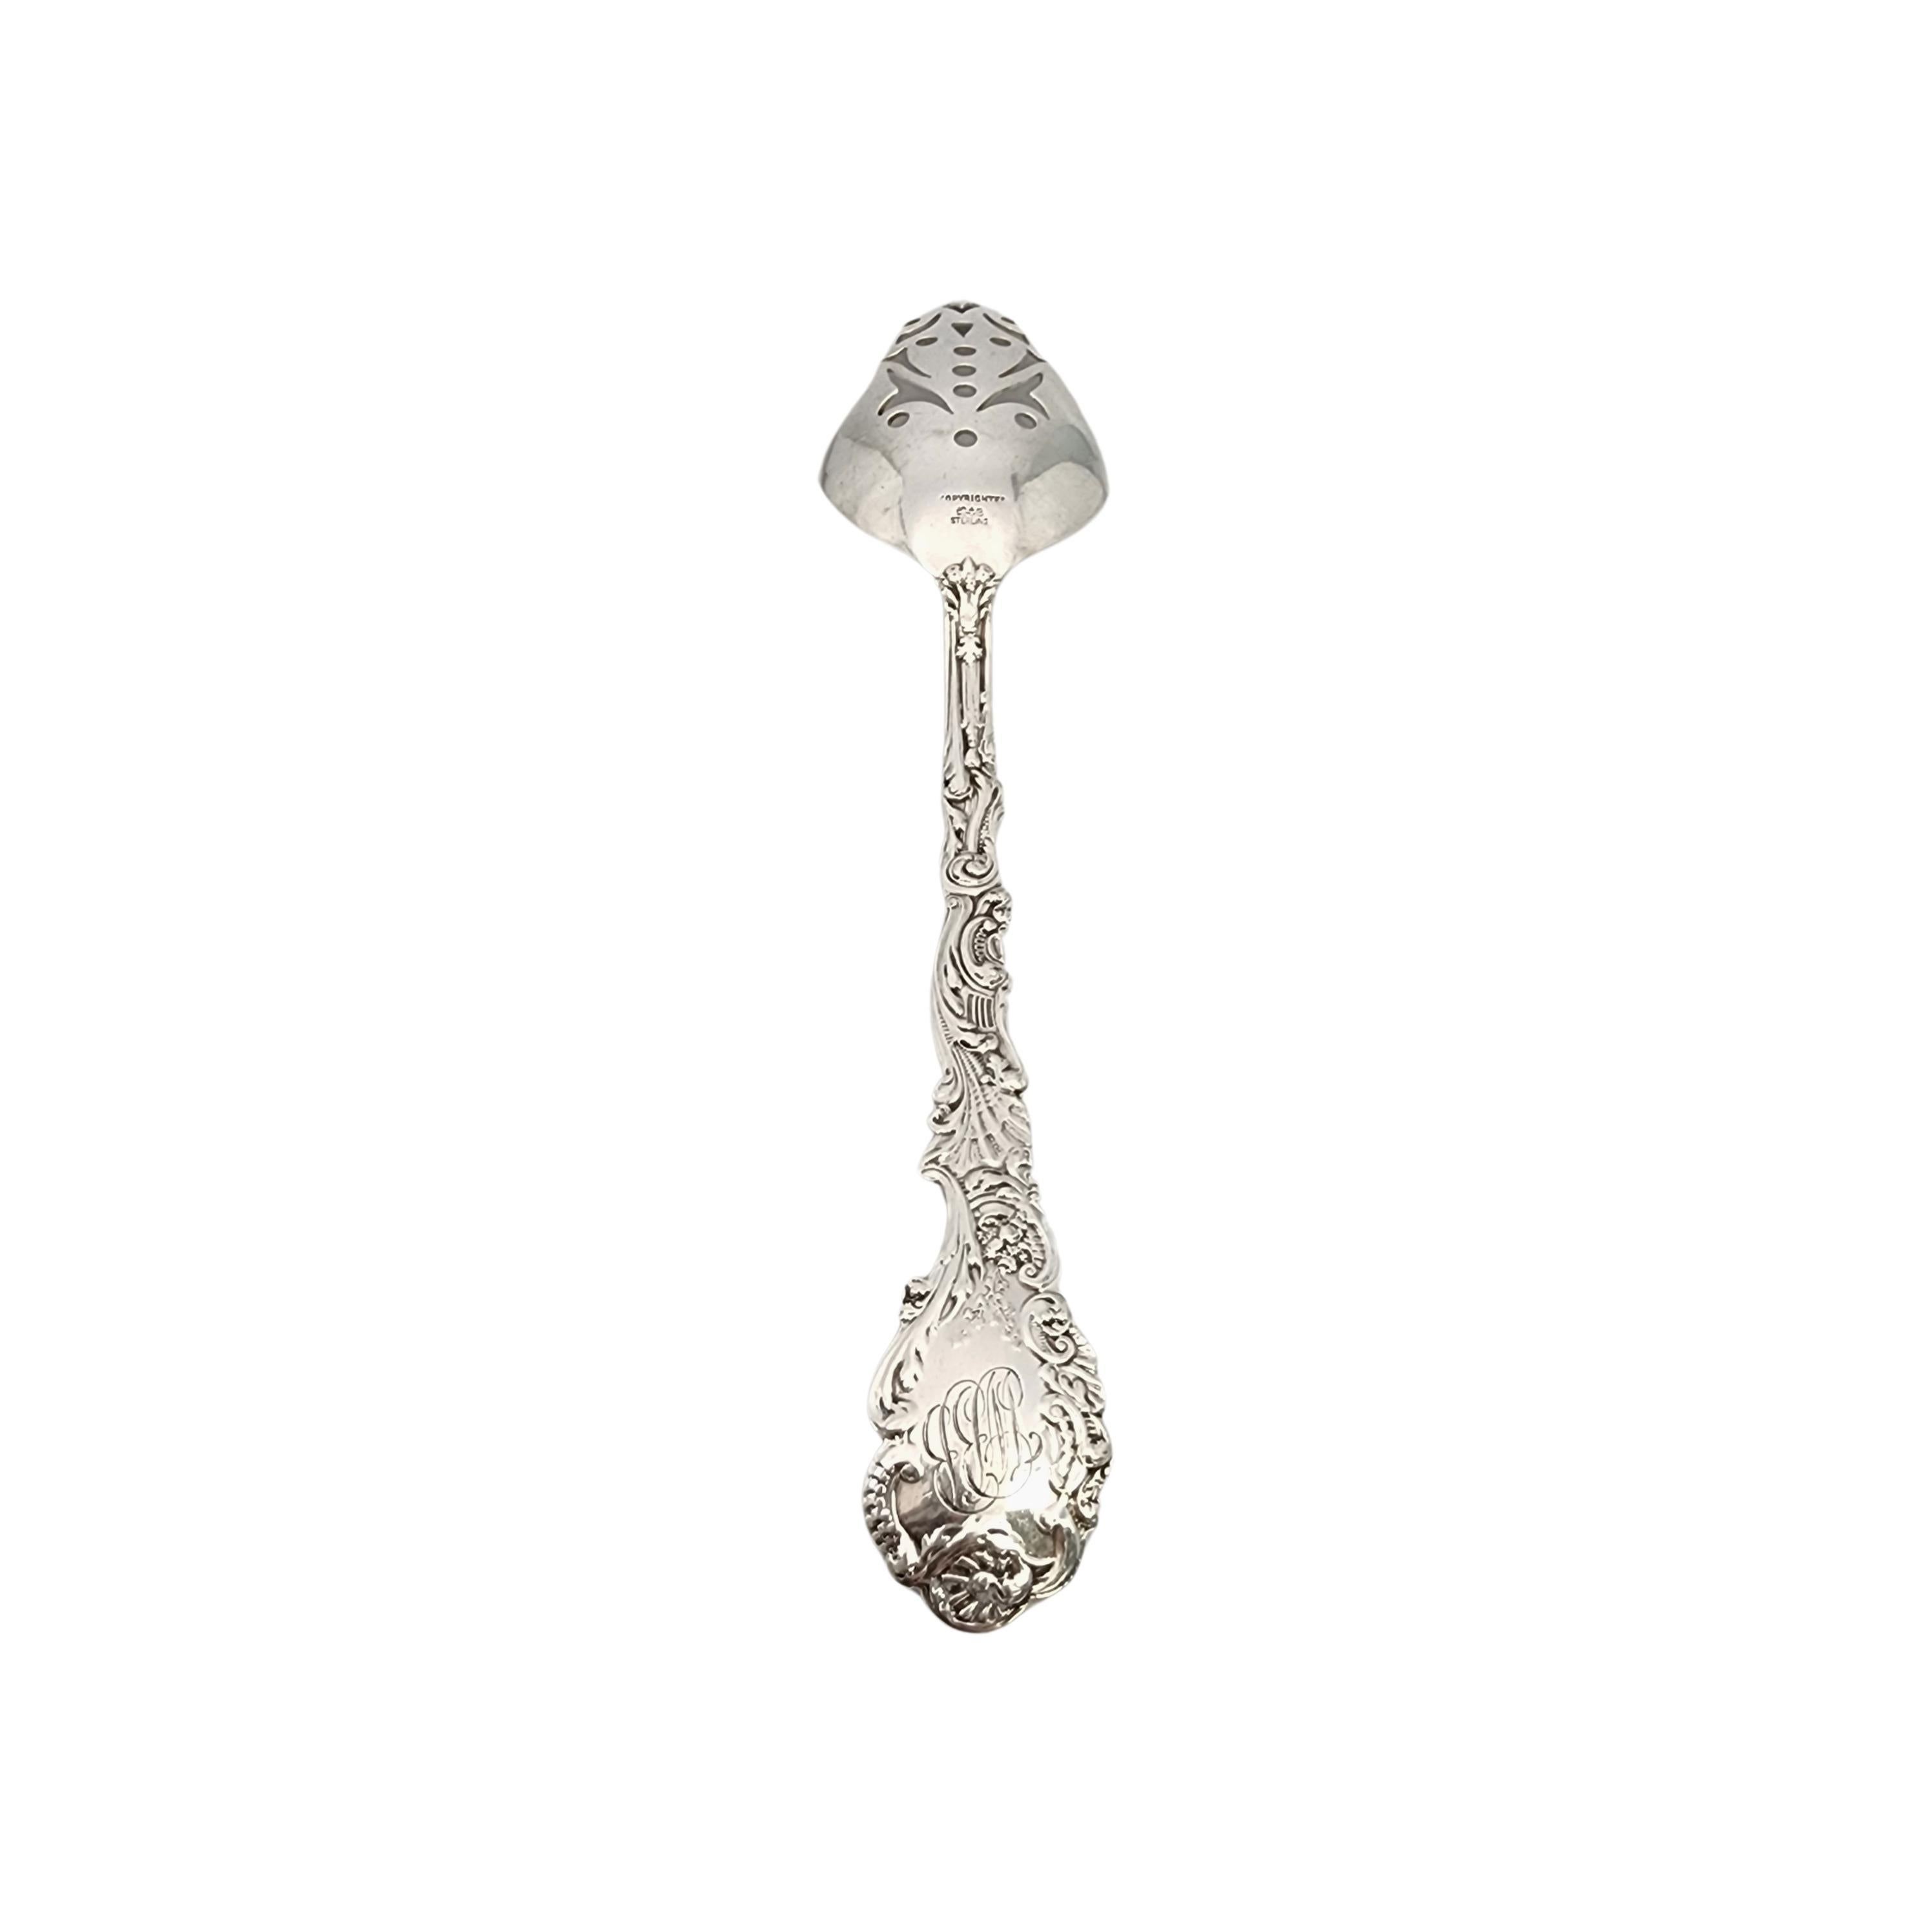 Sterling silver pierced serving tablespoon in the Versailles pattern by Gorham.

Monogram appears to be WBB (see photo).

Gorham's Versailles is a multi motif pattern designed by Antoine Heller in 1888. Named for the Palace of Versailles, the